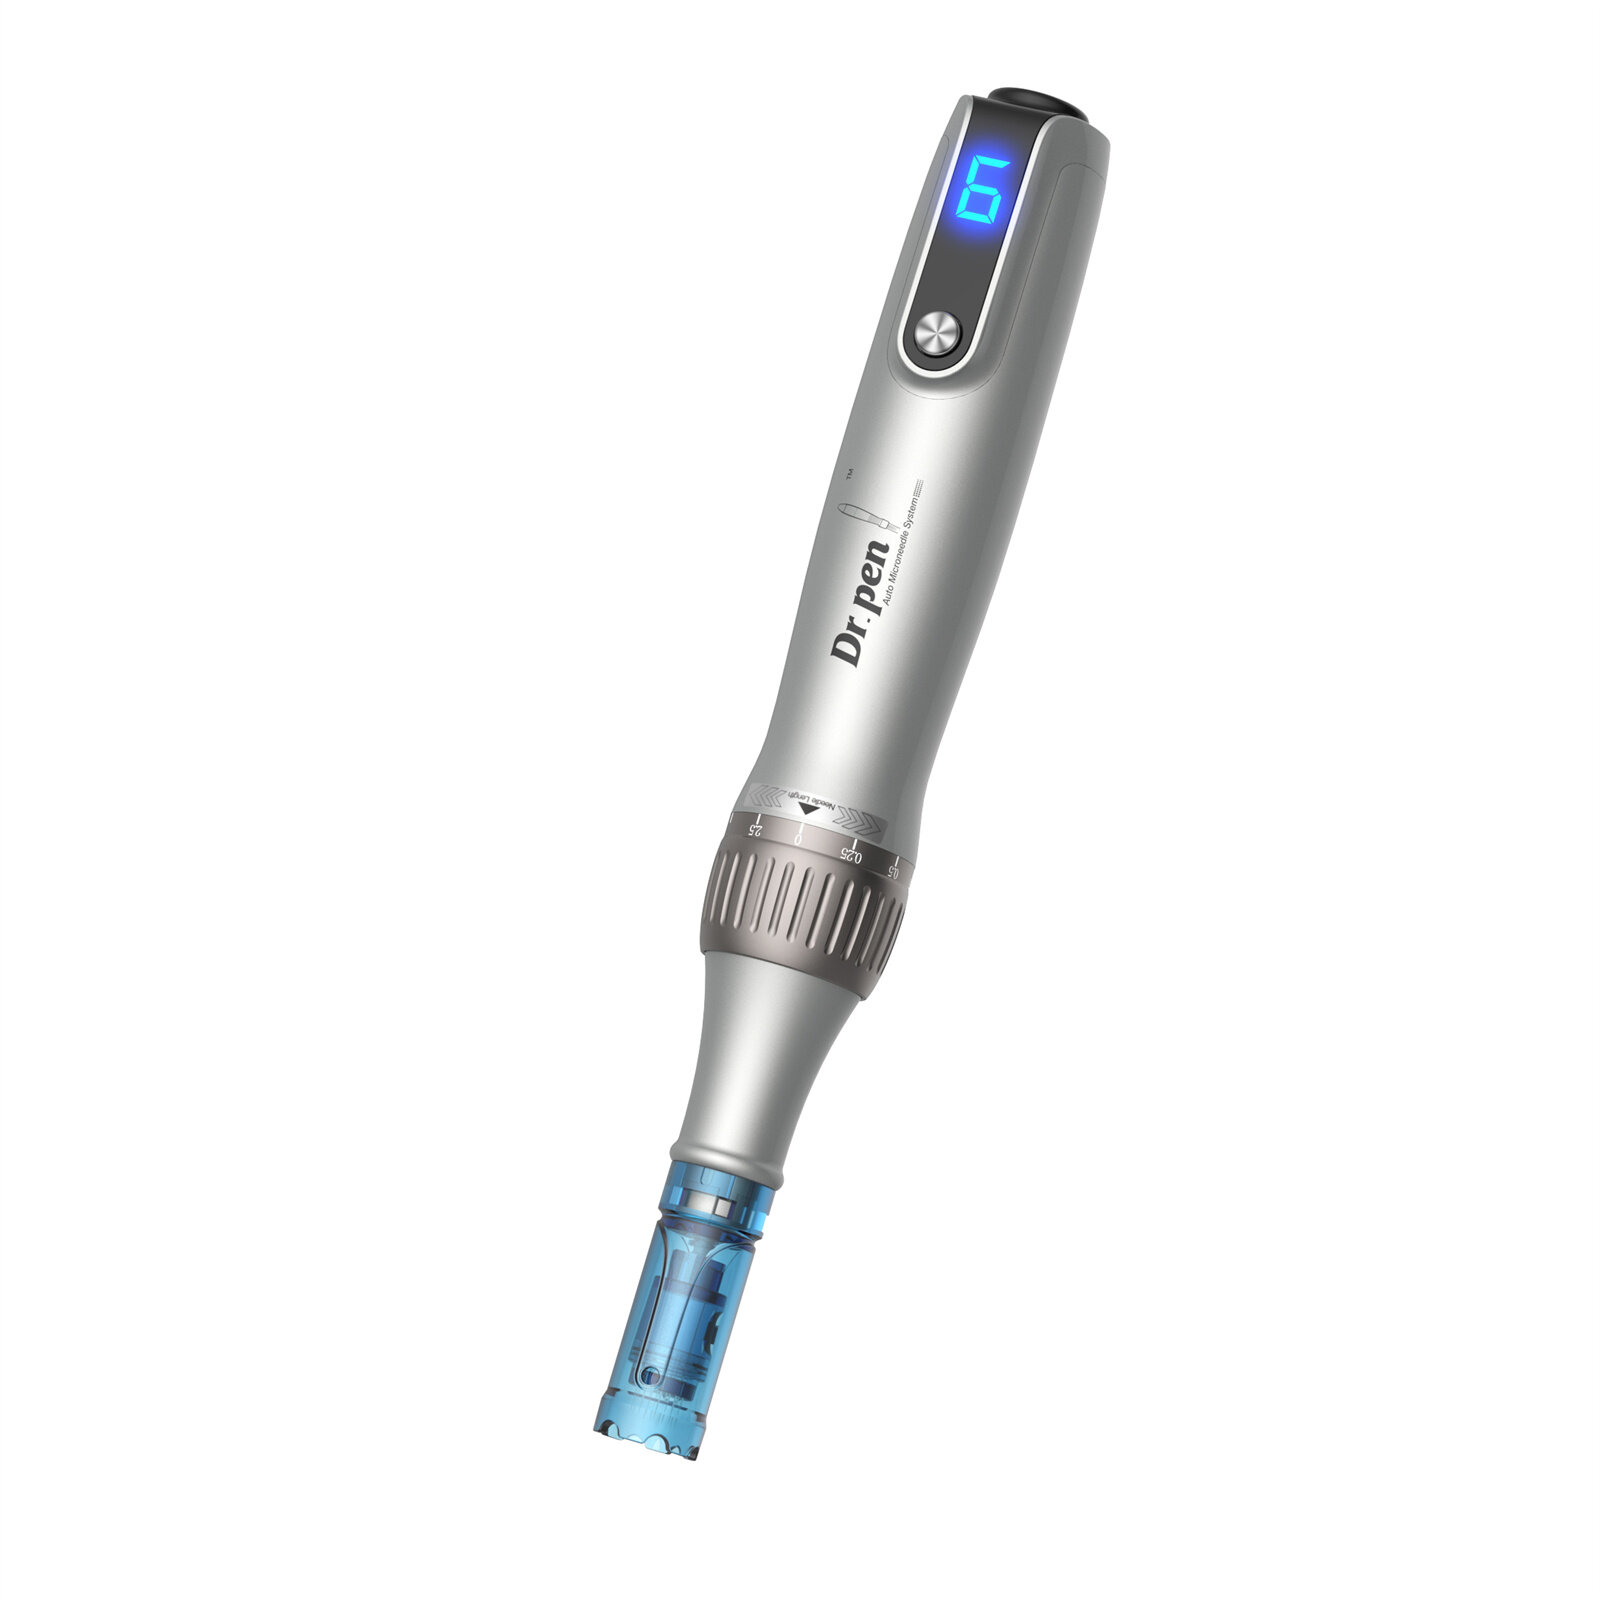 Dr.pen M8S Microneedling Pen Kit Wireless & Wired Modes Adjustable 0-2.5mm Needle Depth Enhances Serum Absorption Fights Signs of Aging like Fine Lines Wrinkles Scars